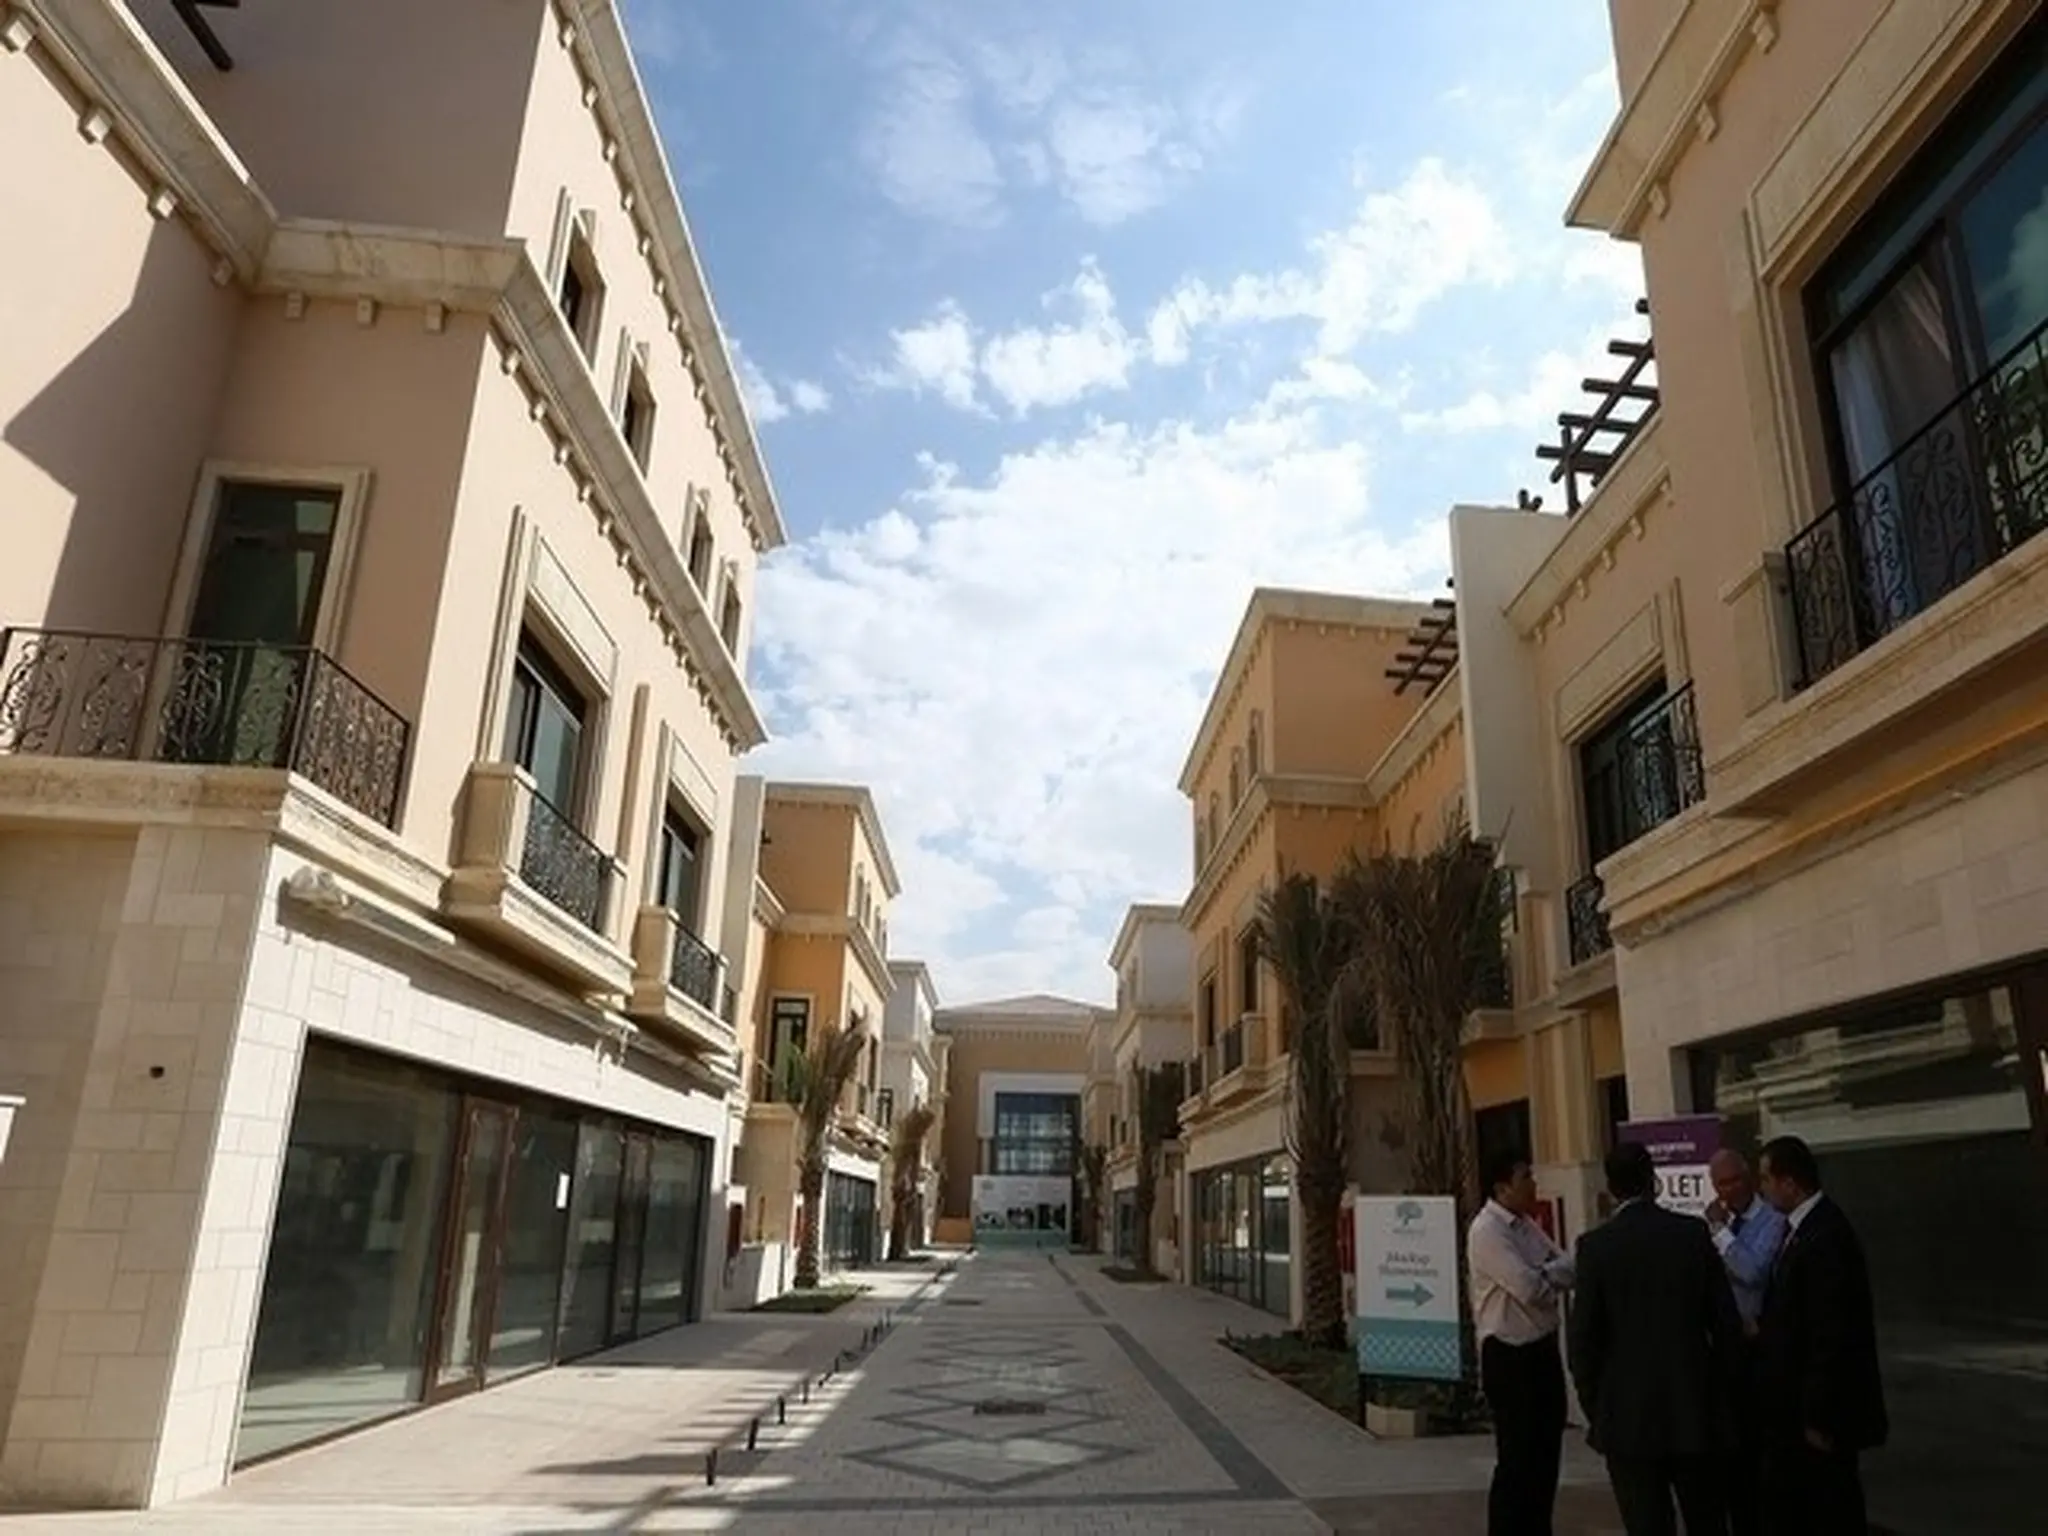 Now..a list of the 5 cheapest places to live in Abu Dhabi